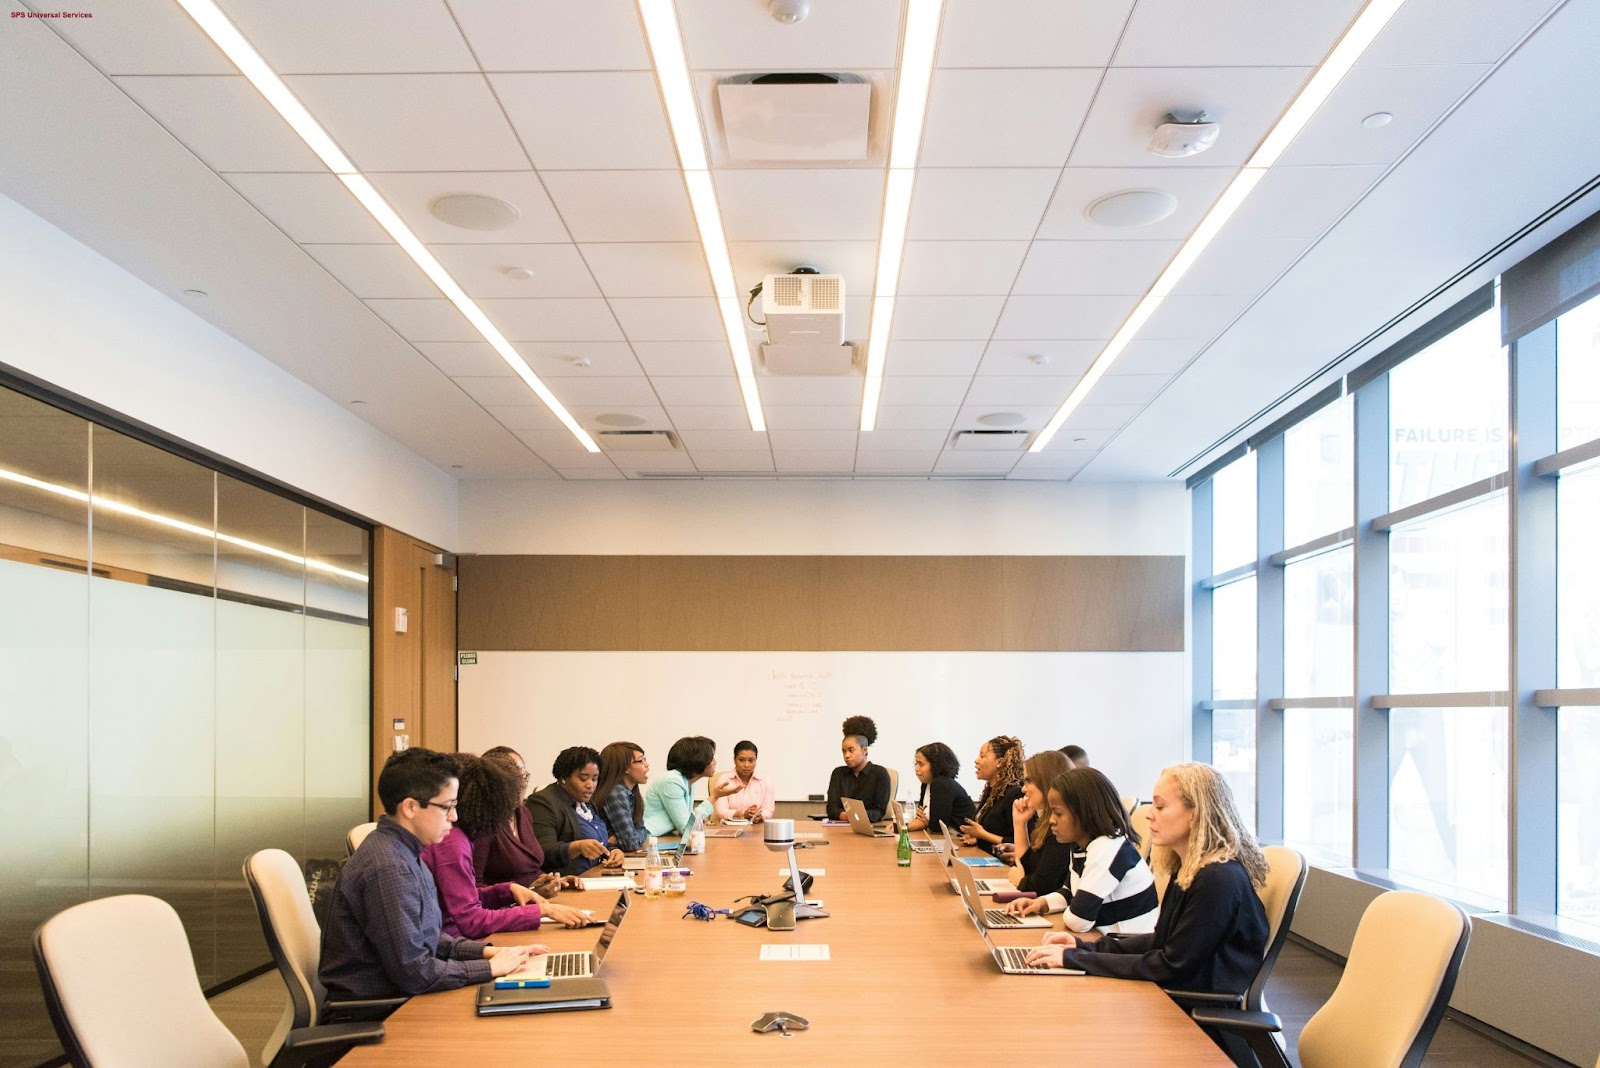 A group of employees participates in a training session around a conference table in a well-lit office space.